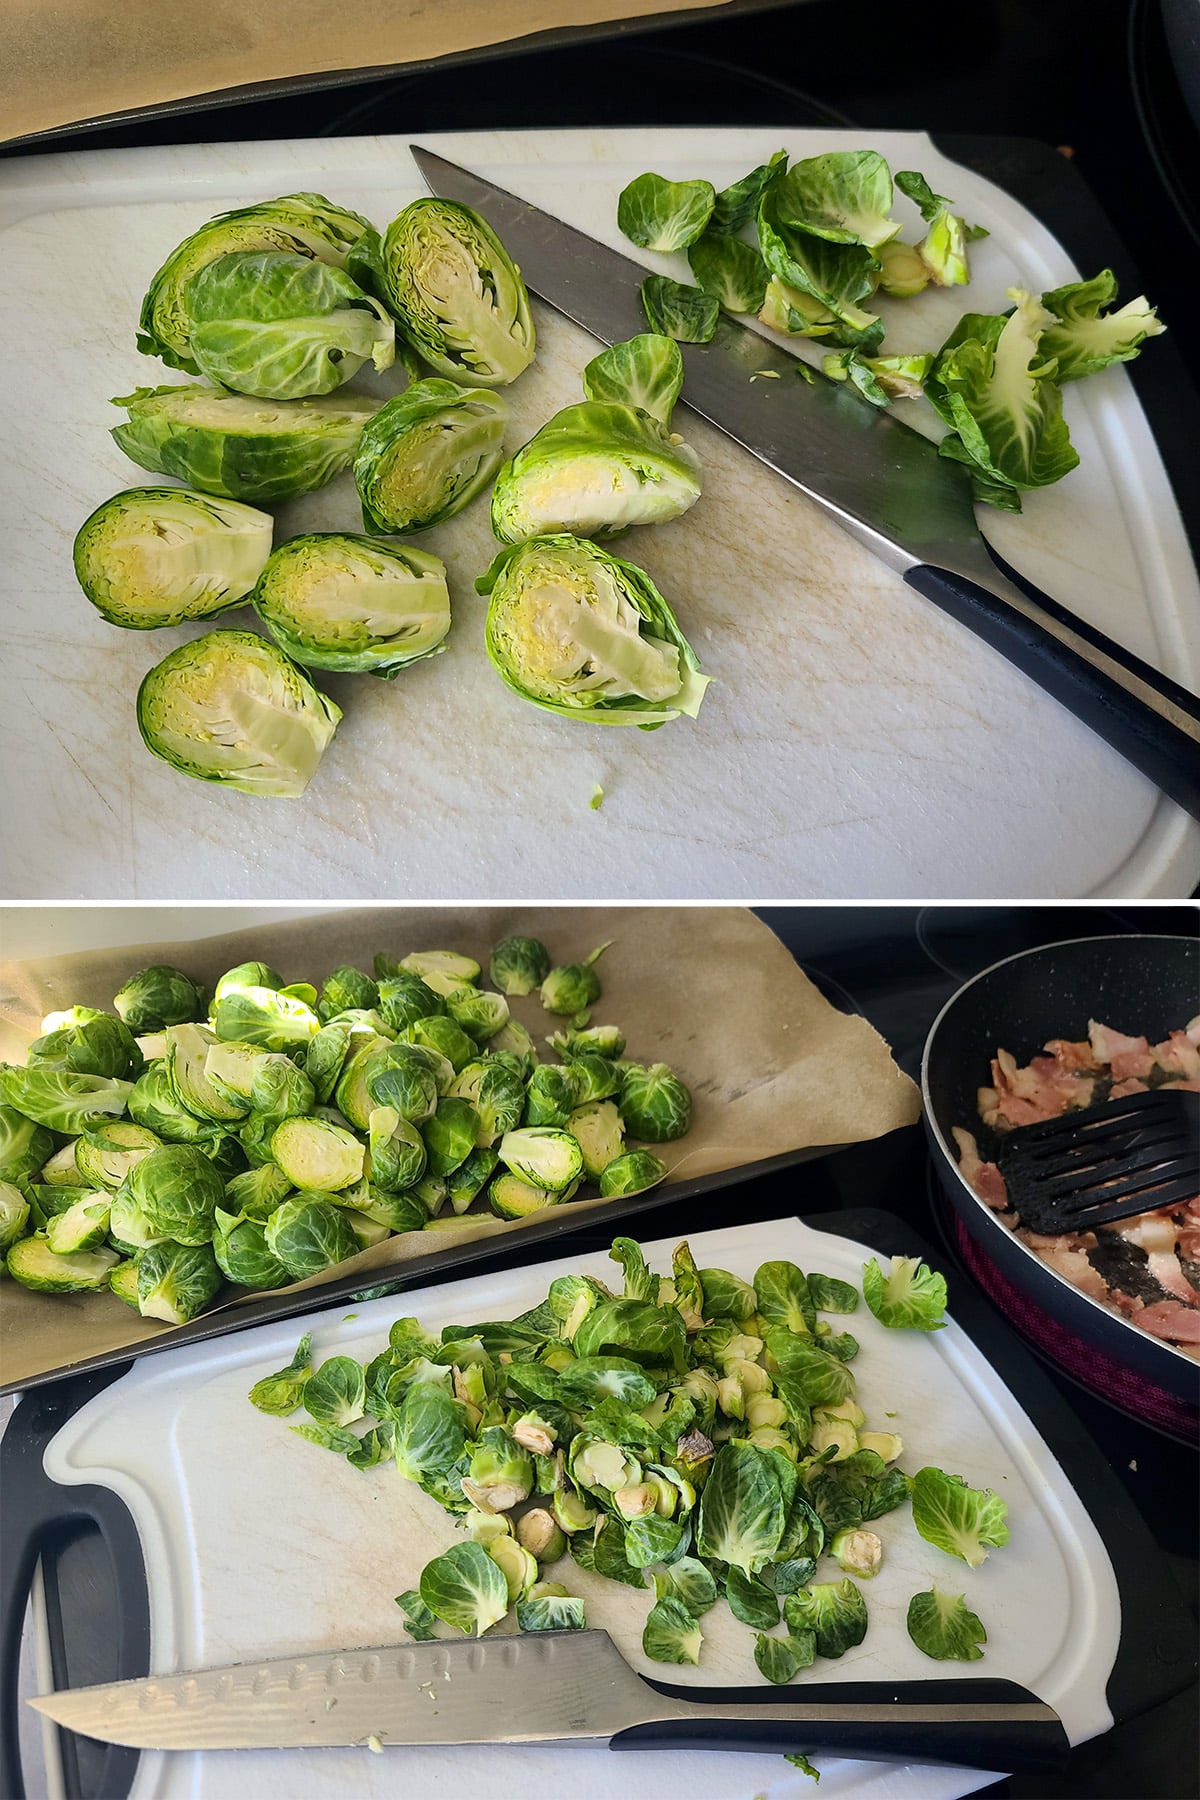 A 2 part image showing the brussels sprouts being trimmed and cut in half.